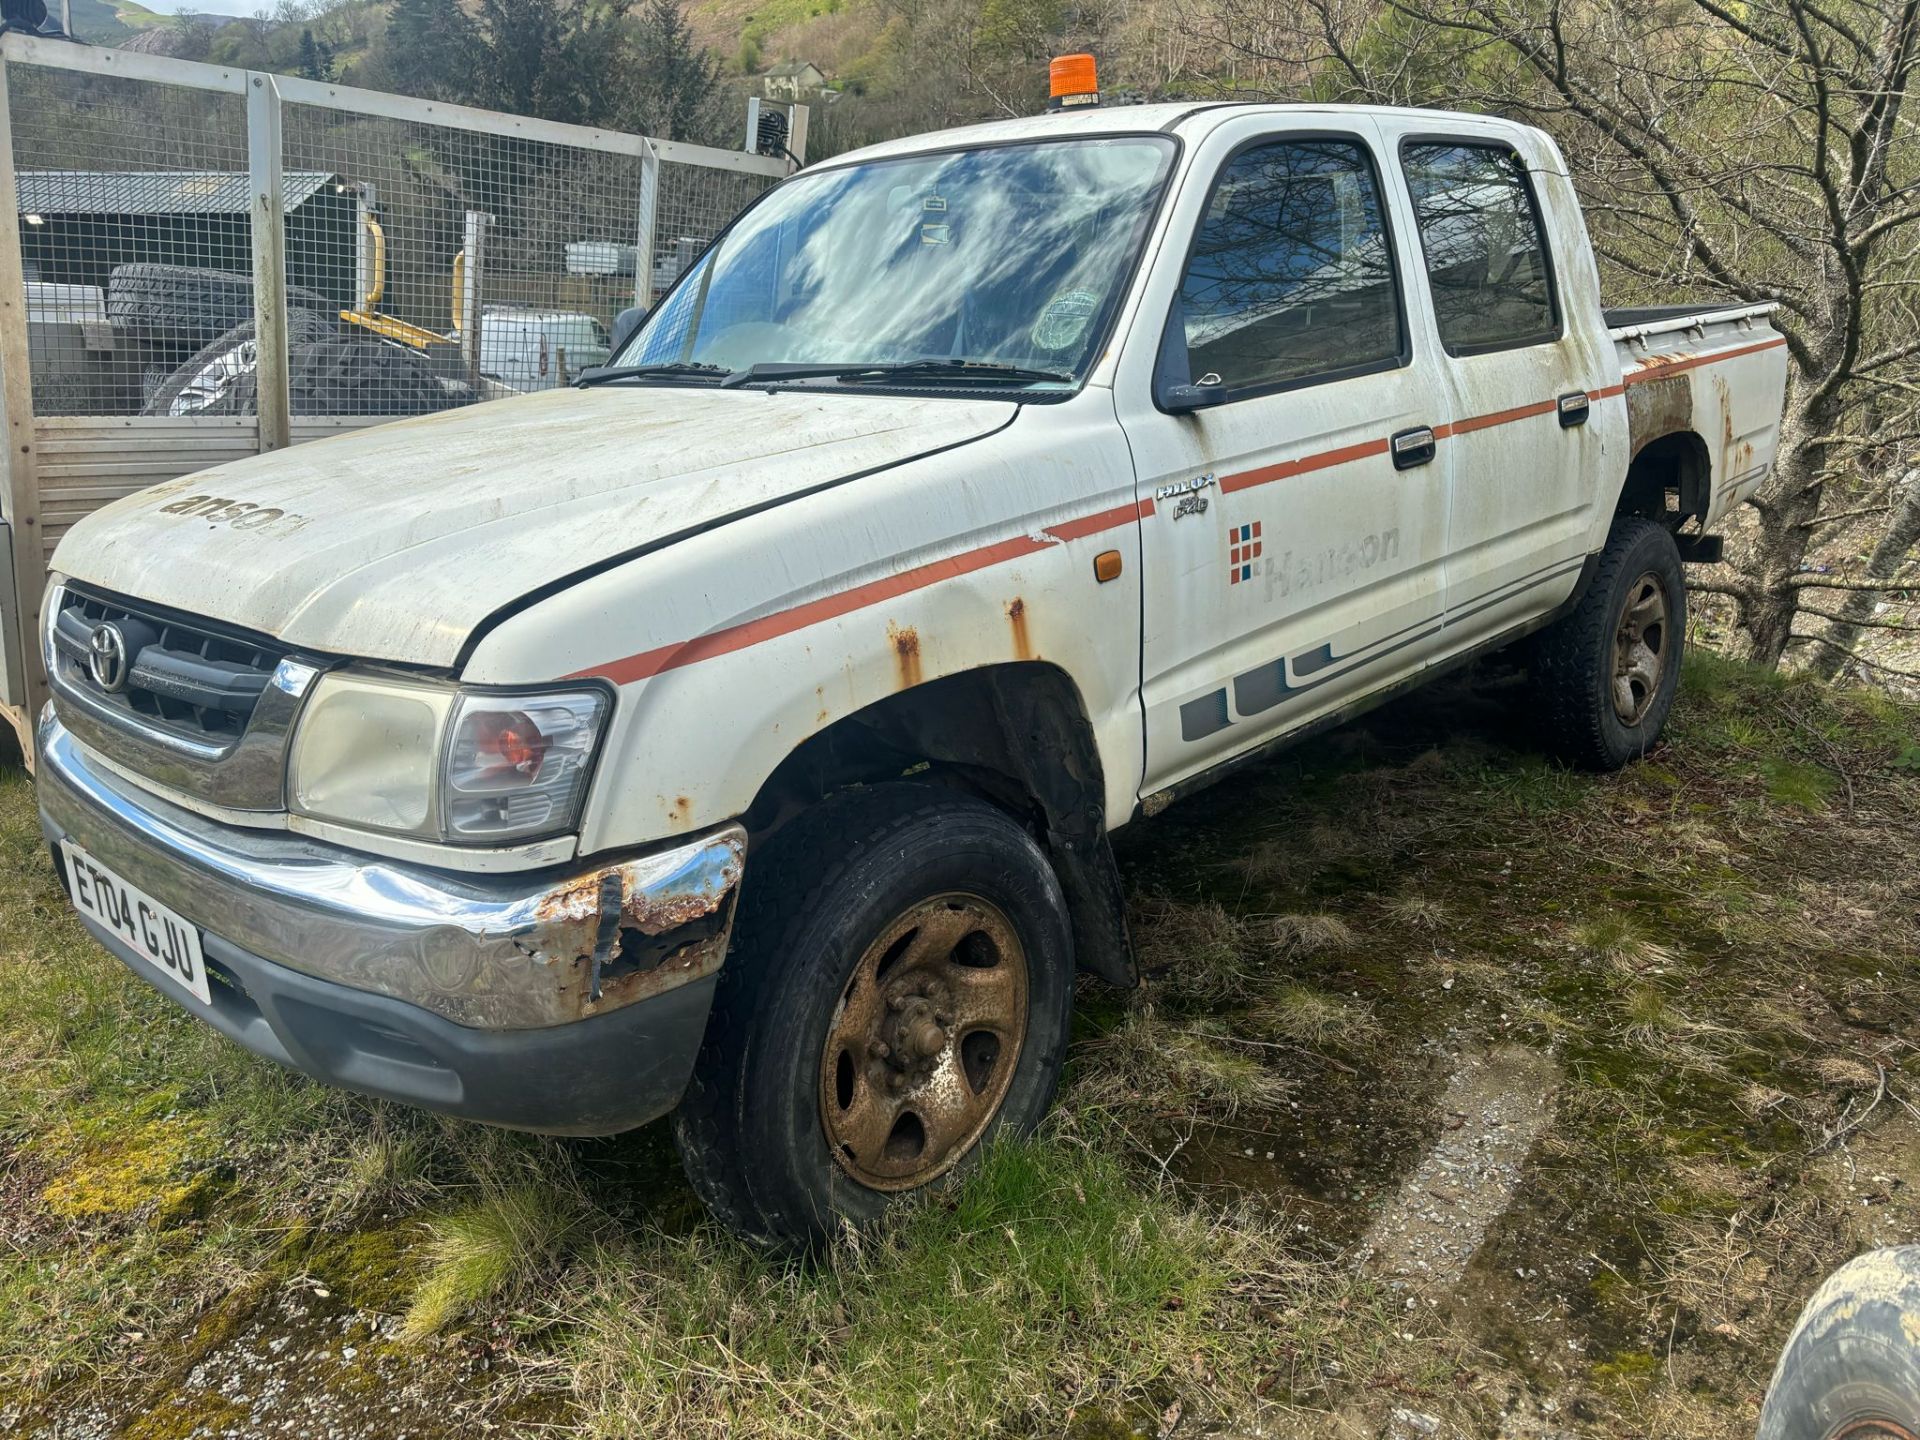 >>>SPECIAL CLEARANCE<<< 2004 TOYOTA HILUX DOUBLE CAB PICKUP TRUCK 4X4 - Image 2 of 4